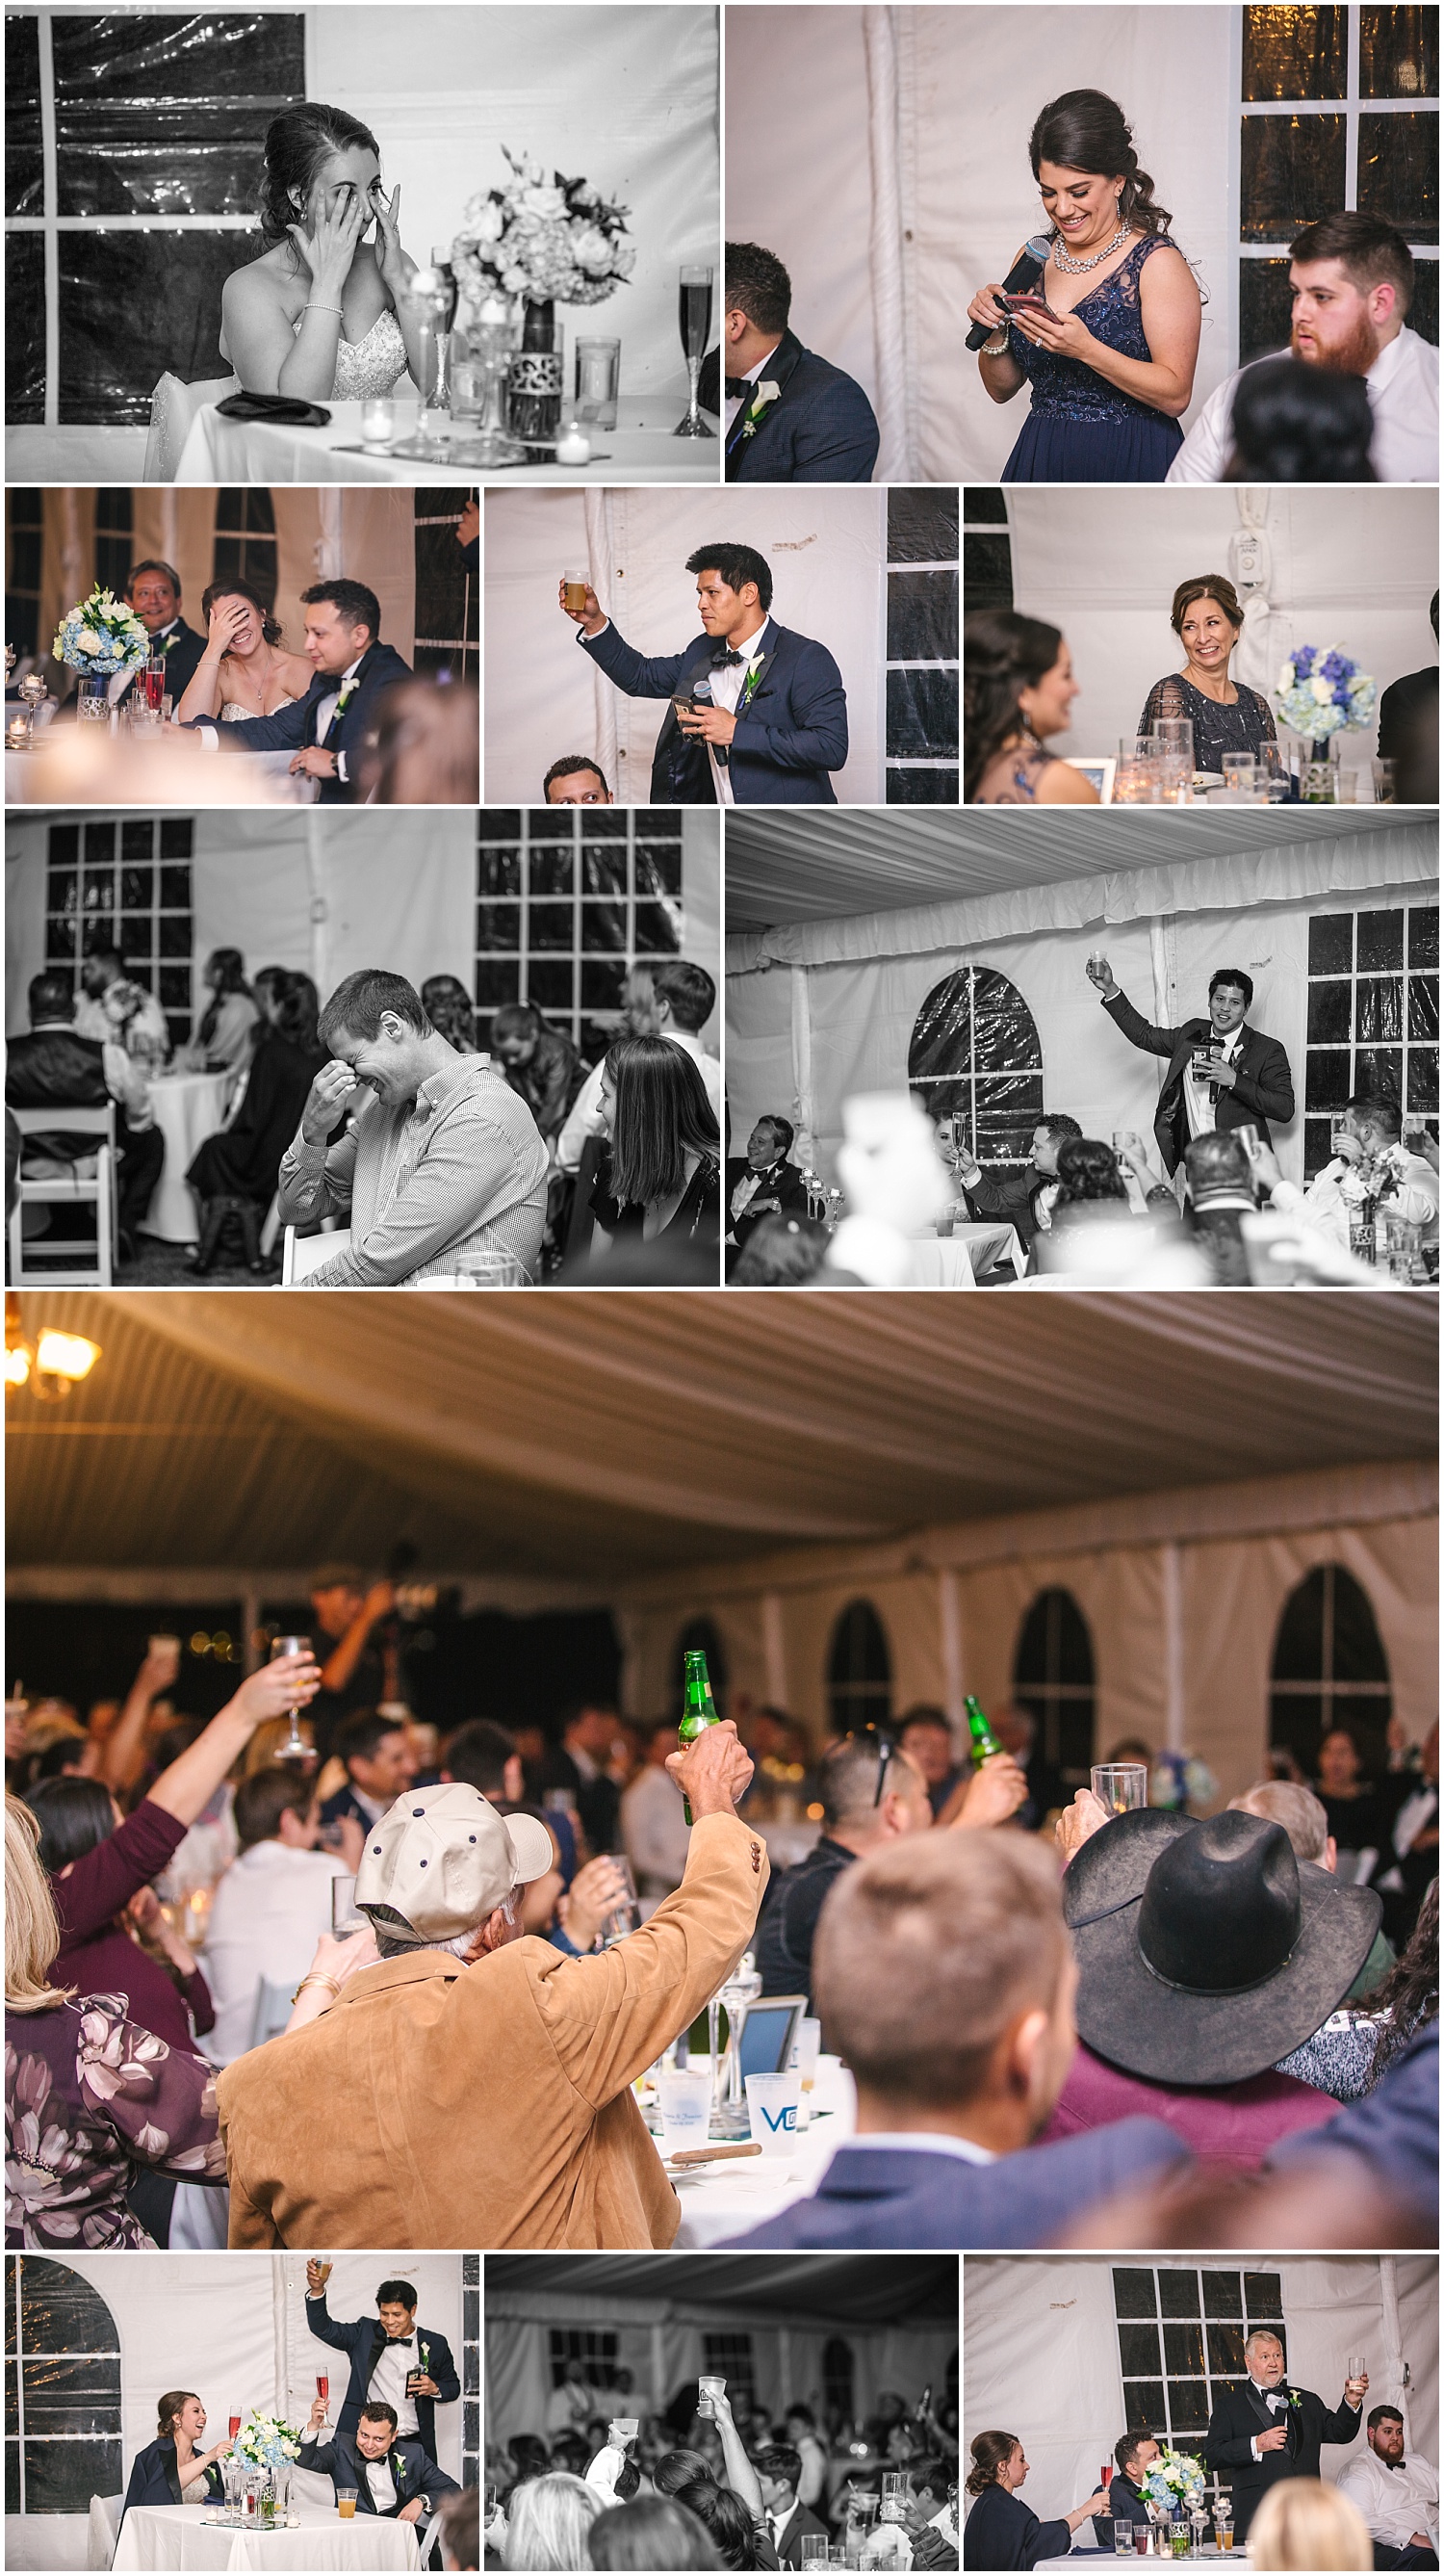 Toasts to the bride and groom under the tent at Prairie Star Restaurant wedding